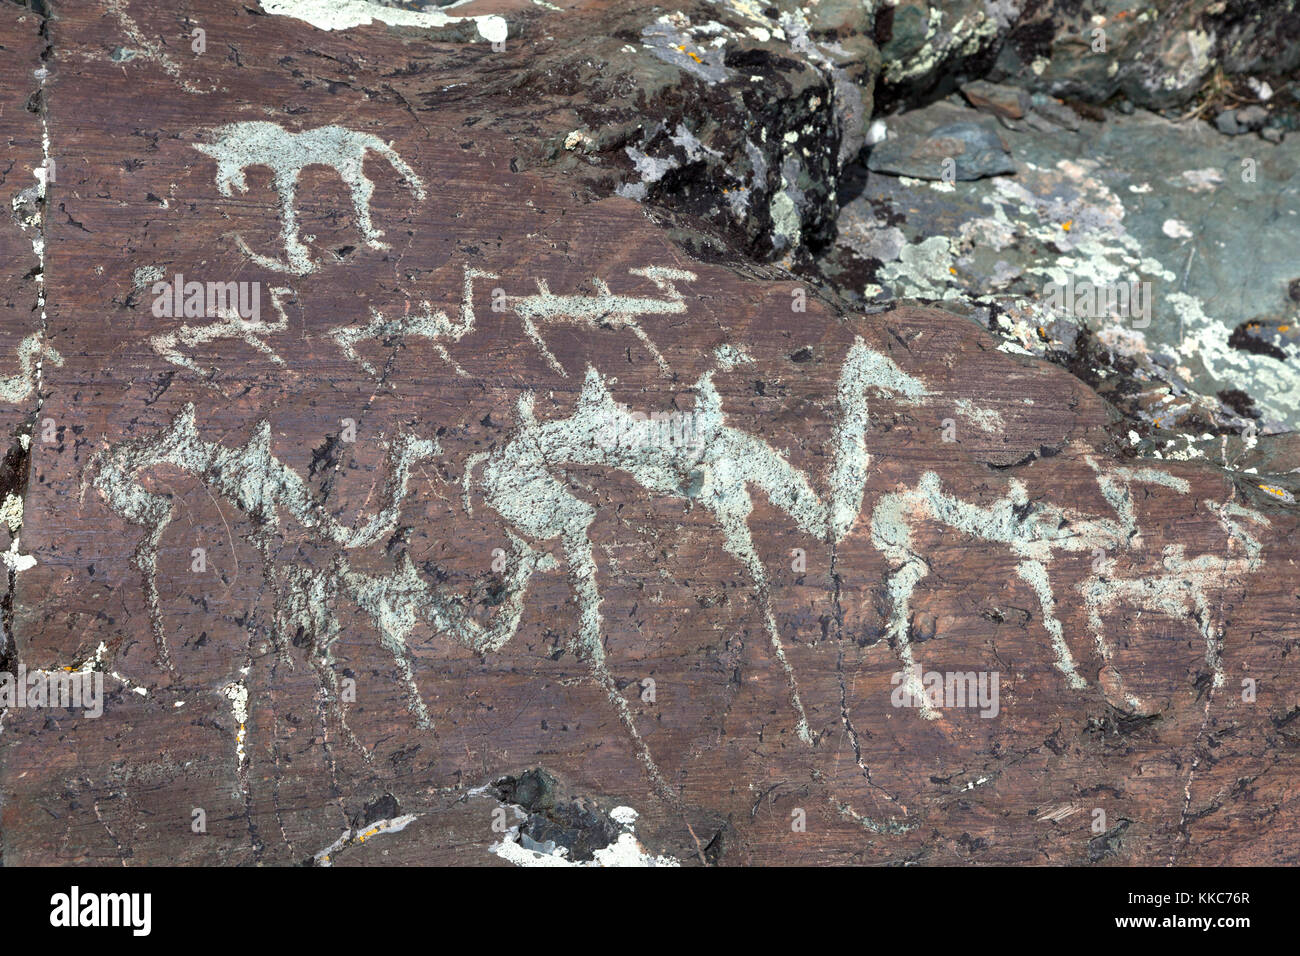 The ancient drawings on rocks Stock Photo